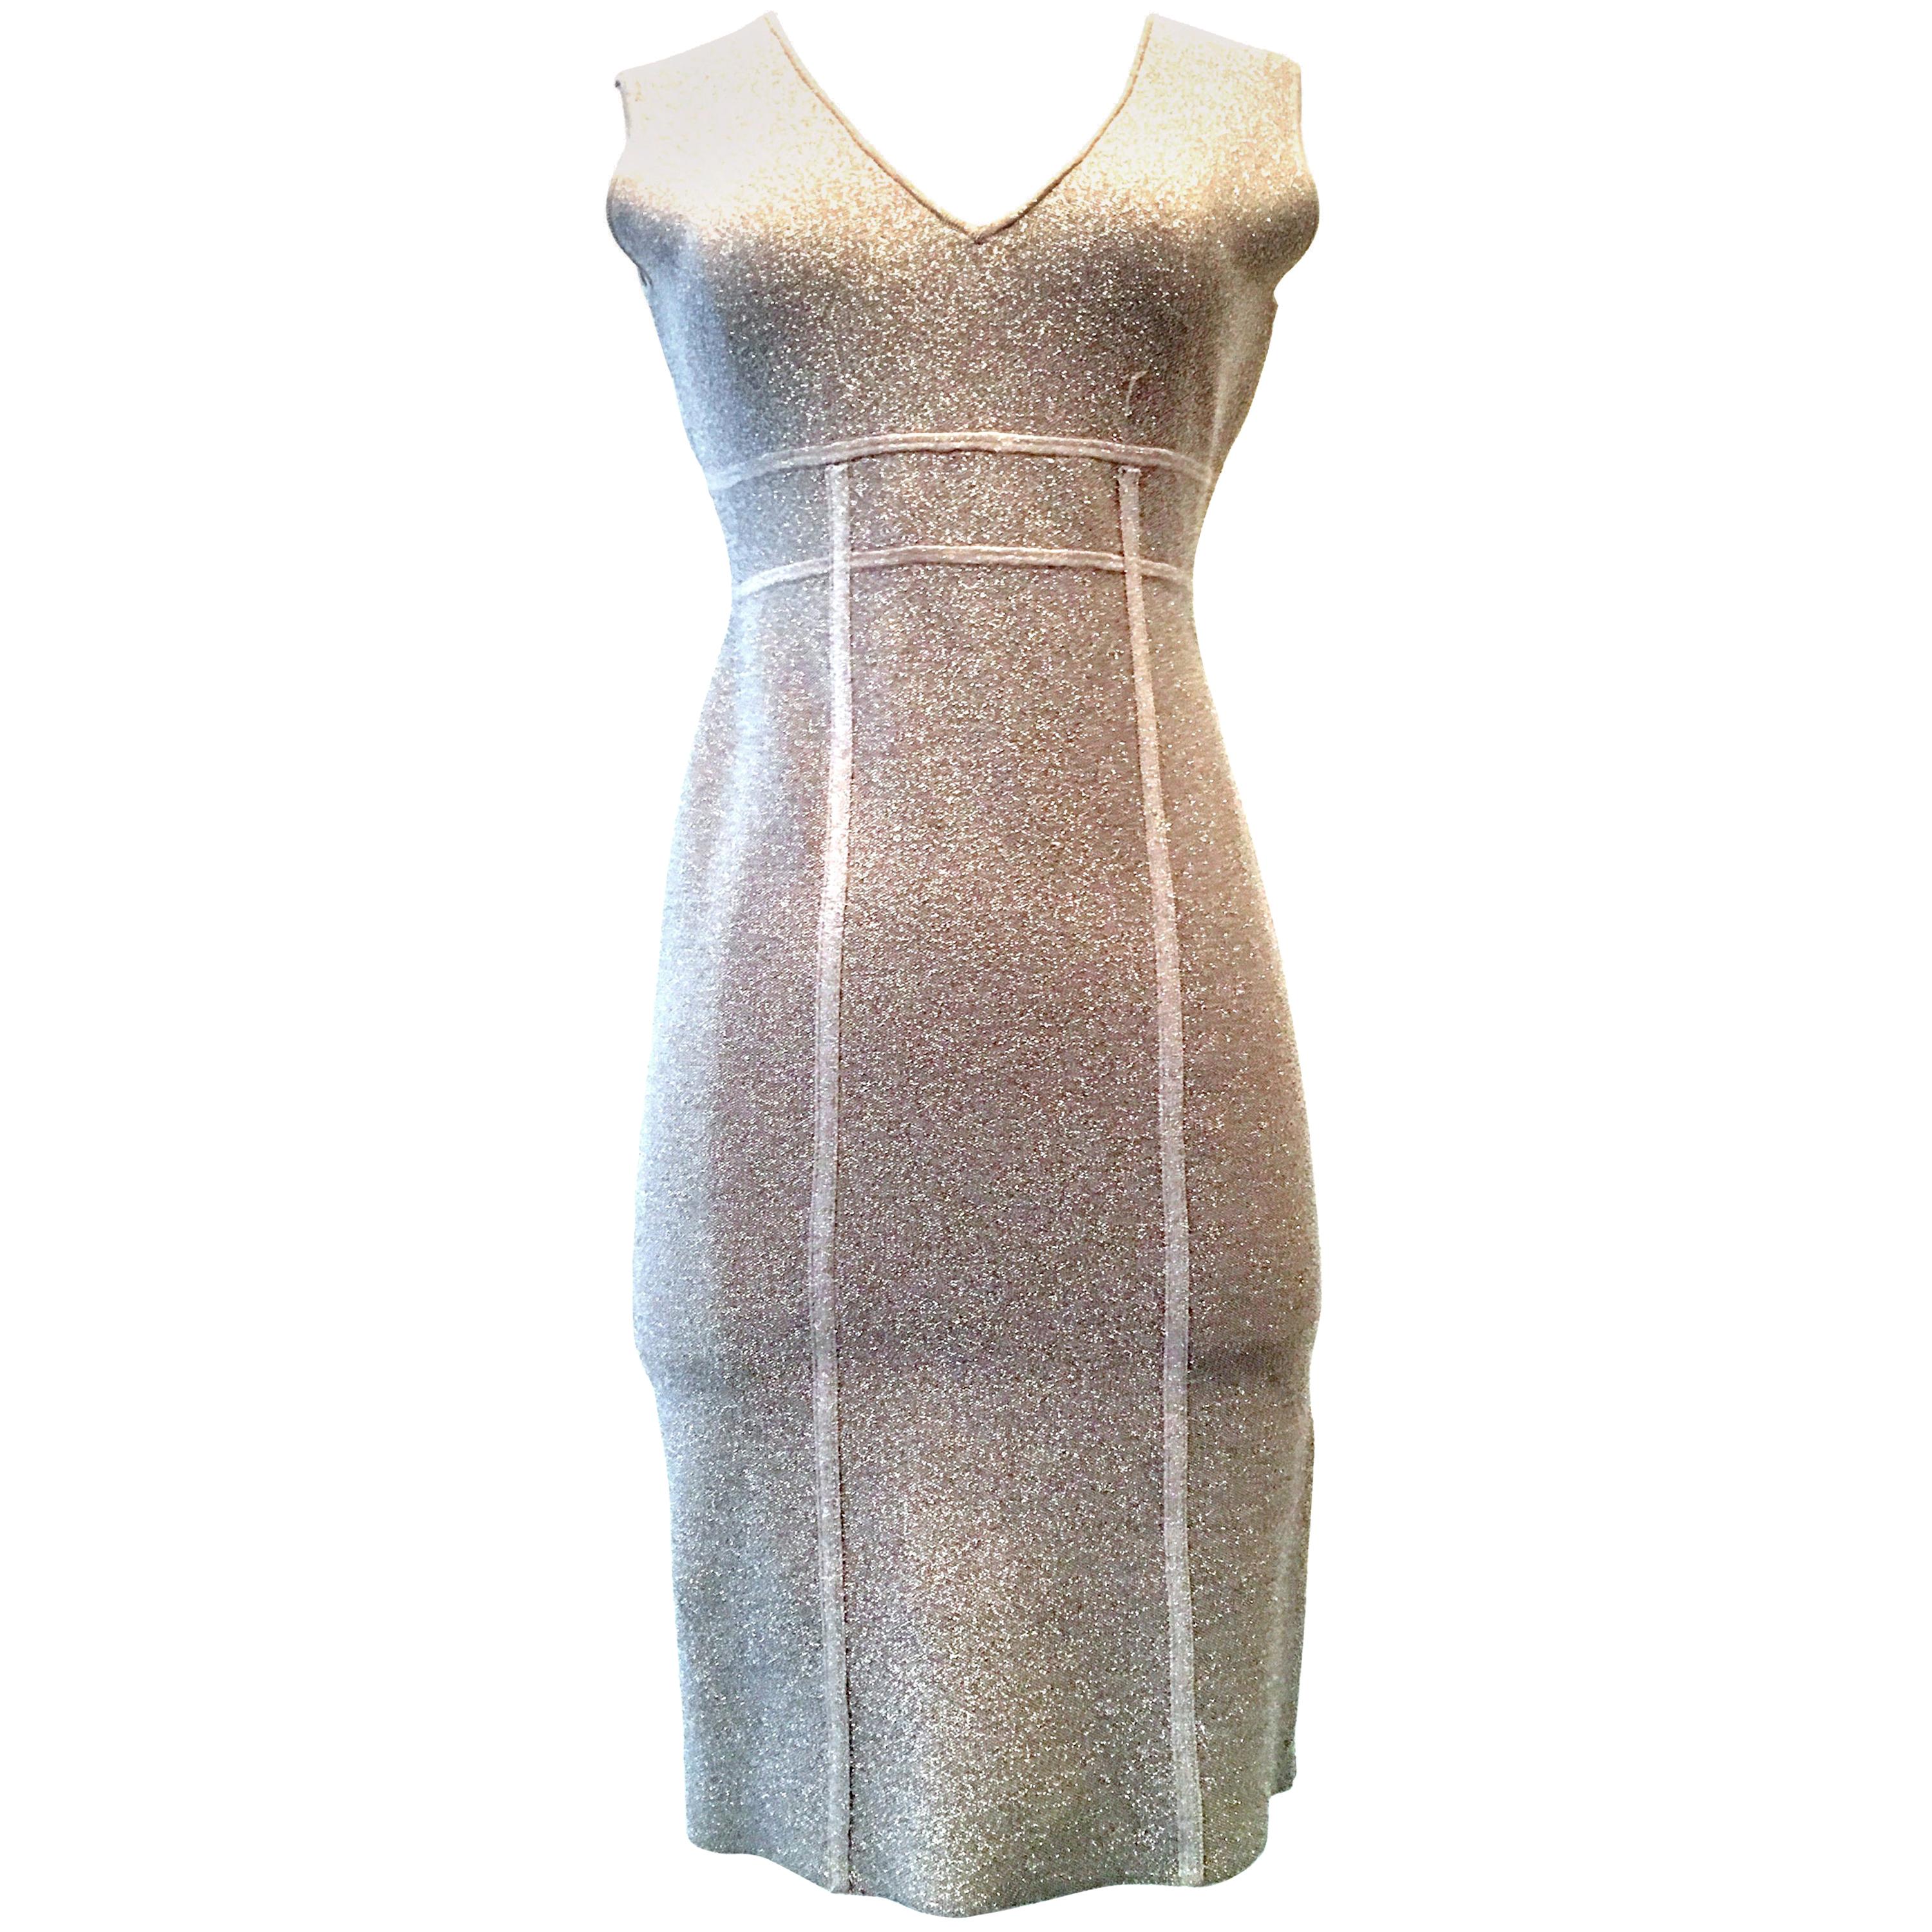 21st Century Herve Leger Style Metallic Cocktail Dress By Maxazria For BCBG  For Sale